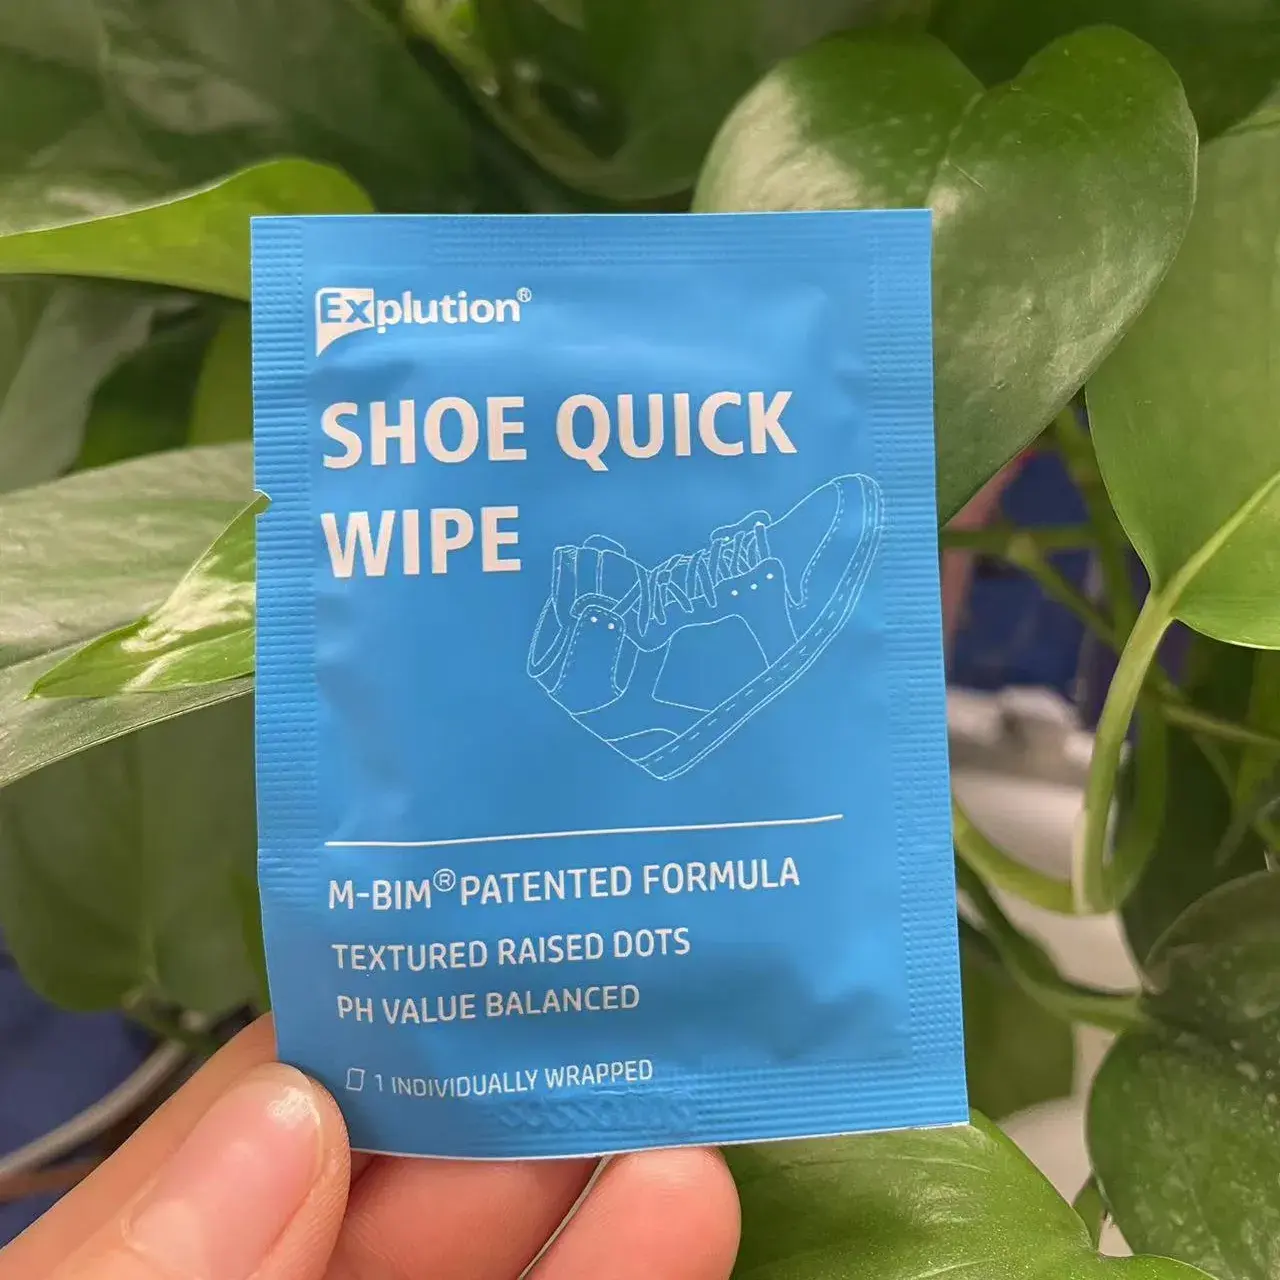 Premium Sneaker Cleaning Wipes Dual Textured Individually Quick Care Wipes for Leather Nubuck rubber sneaker shoes boots